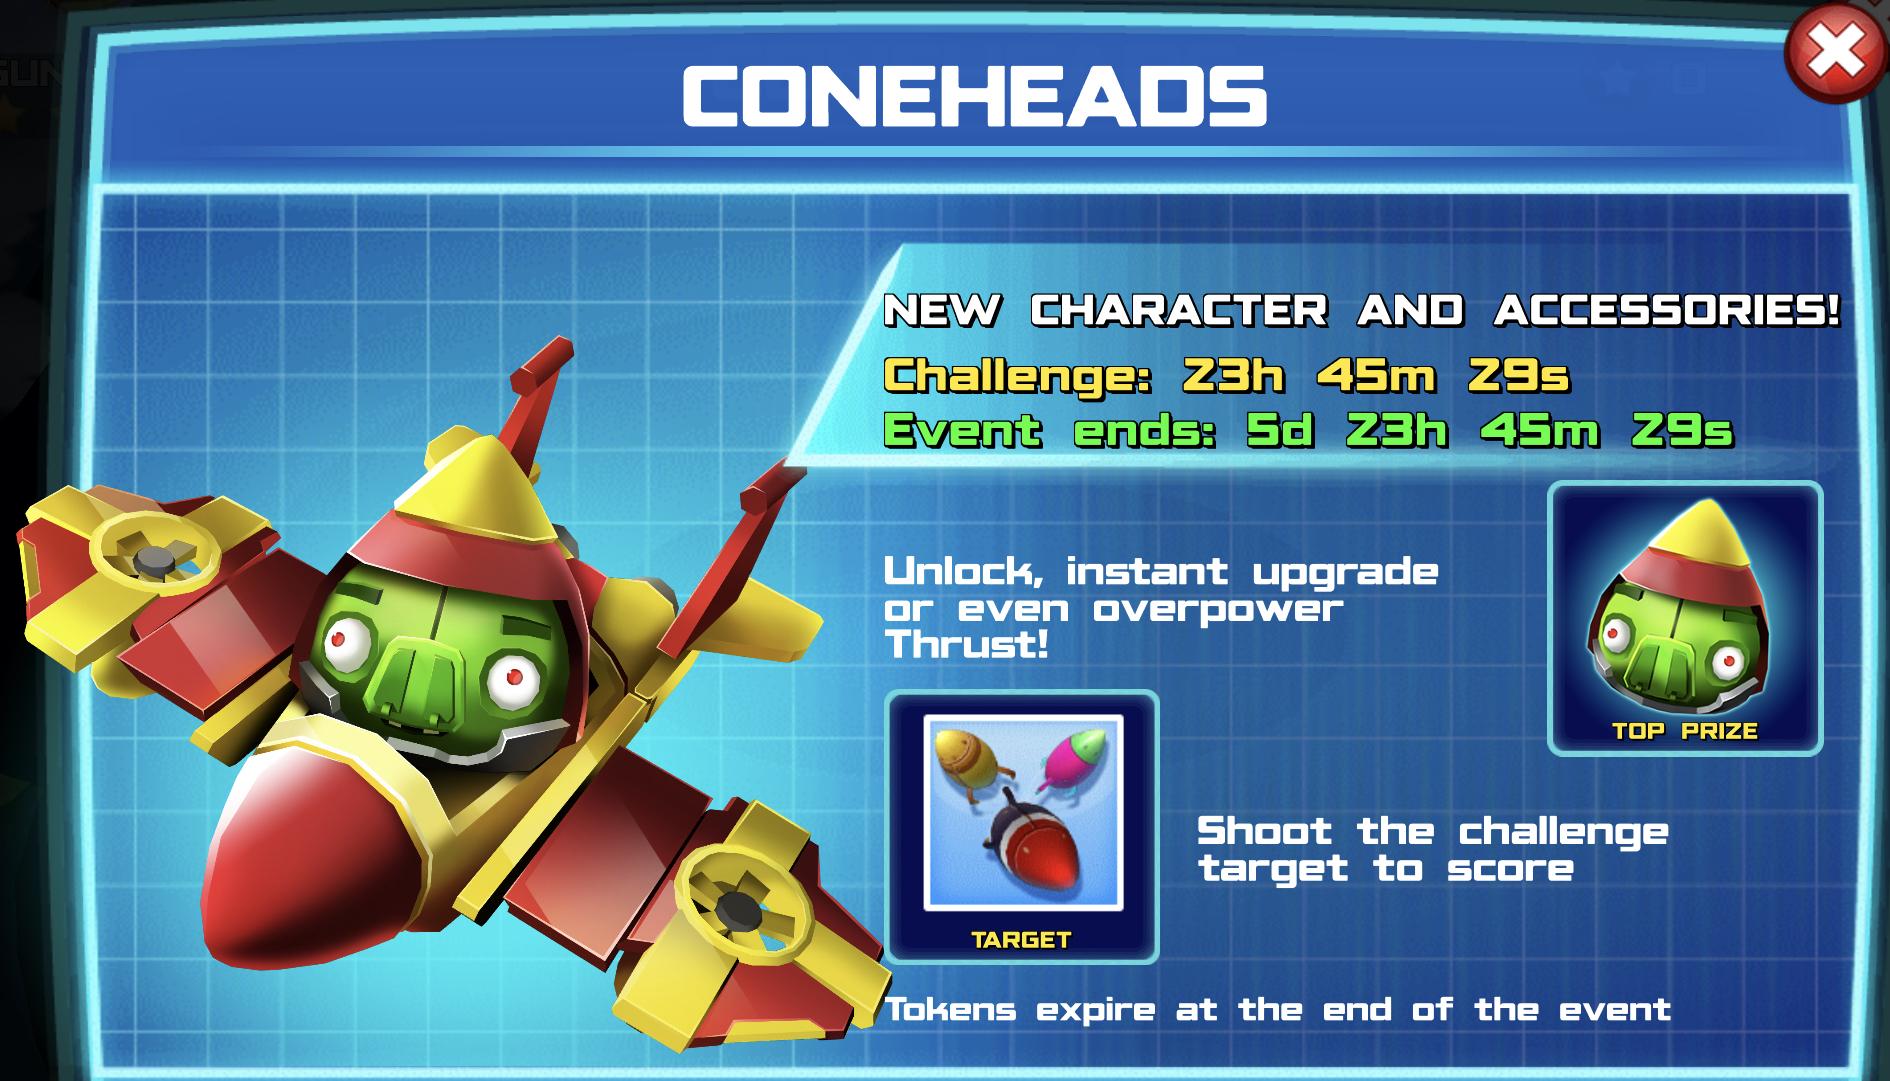 The Event Banner for the Coneheads